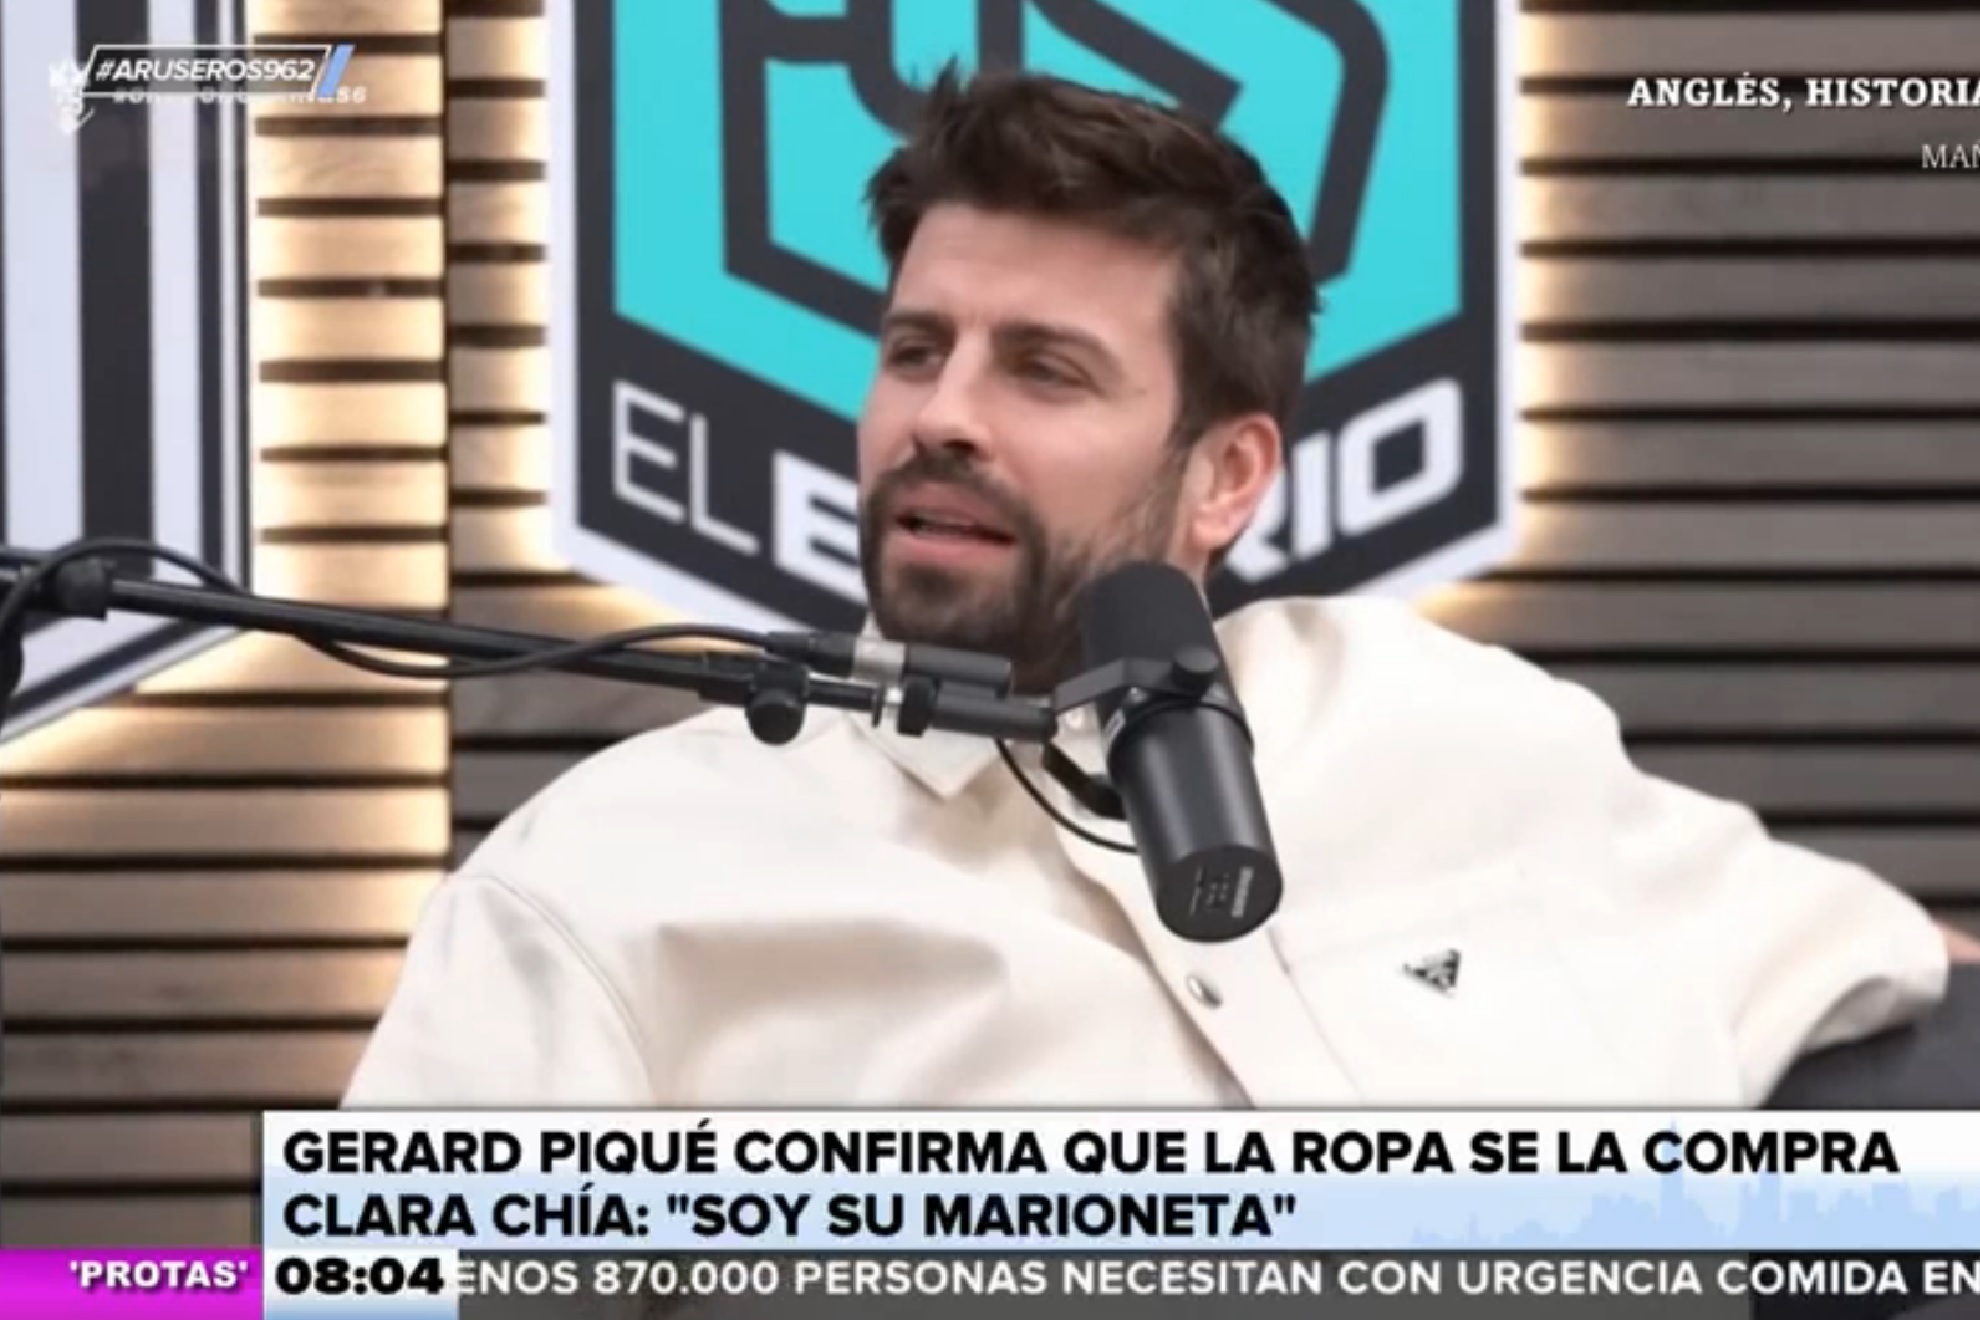 Pique confesses that he doesn't follow fashion trends and claims Clara Chia chooses his clothes: I am a puppet